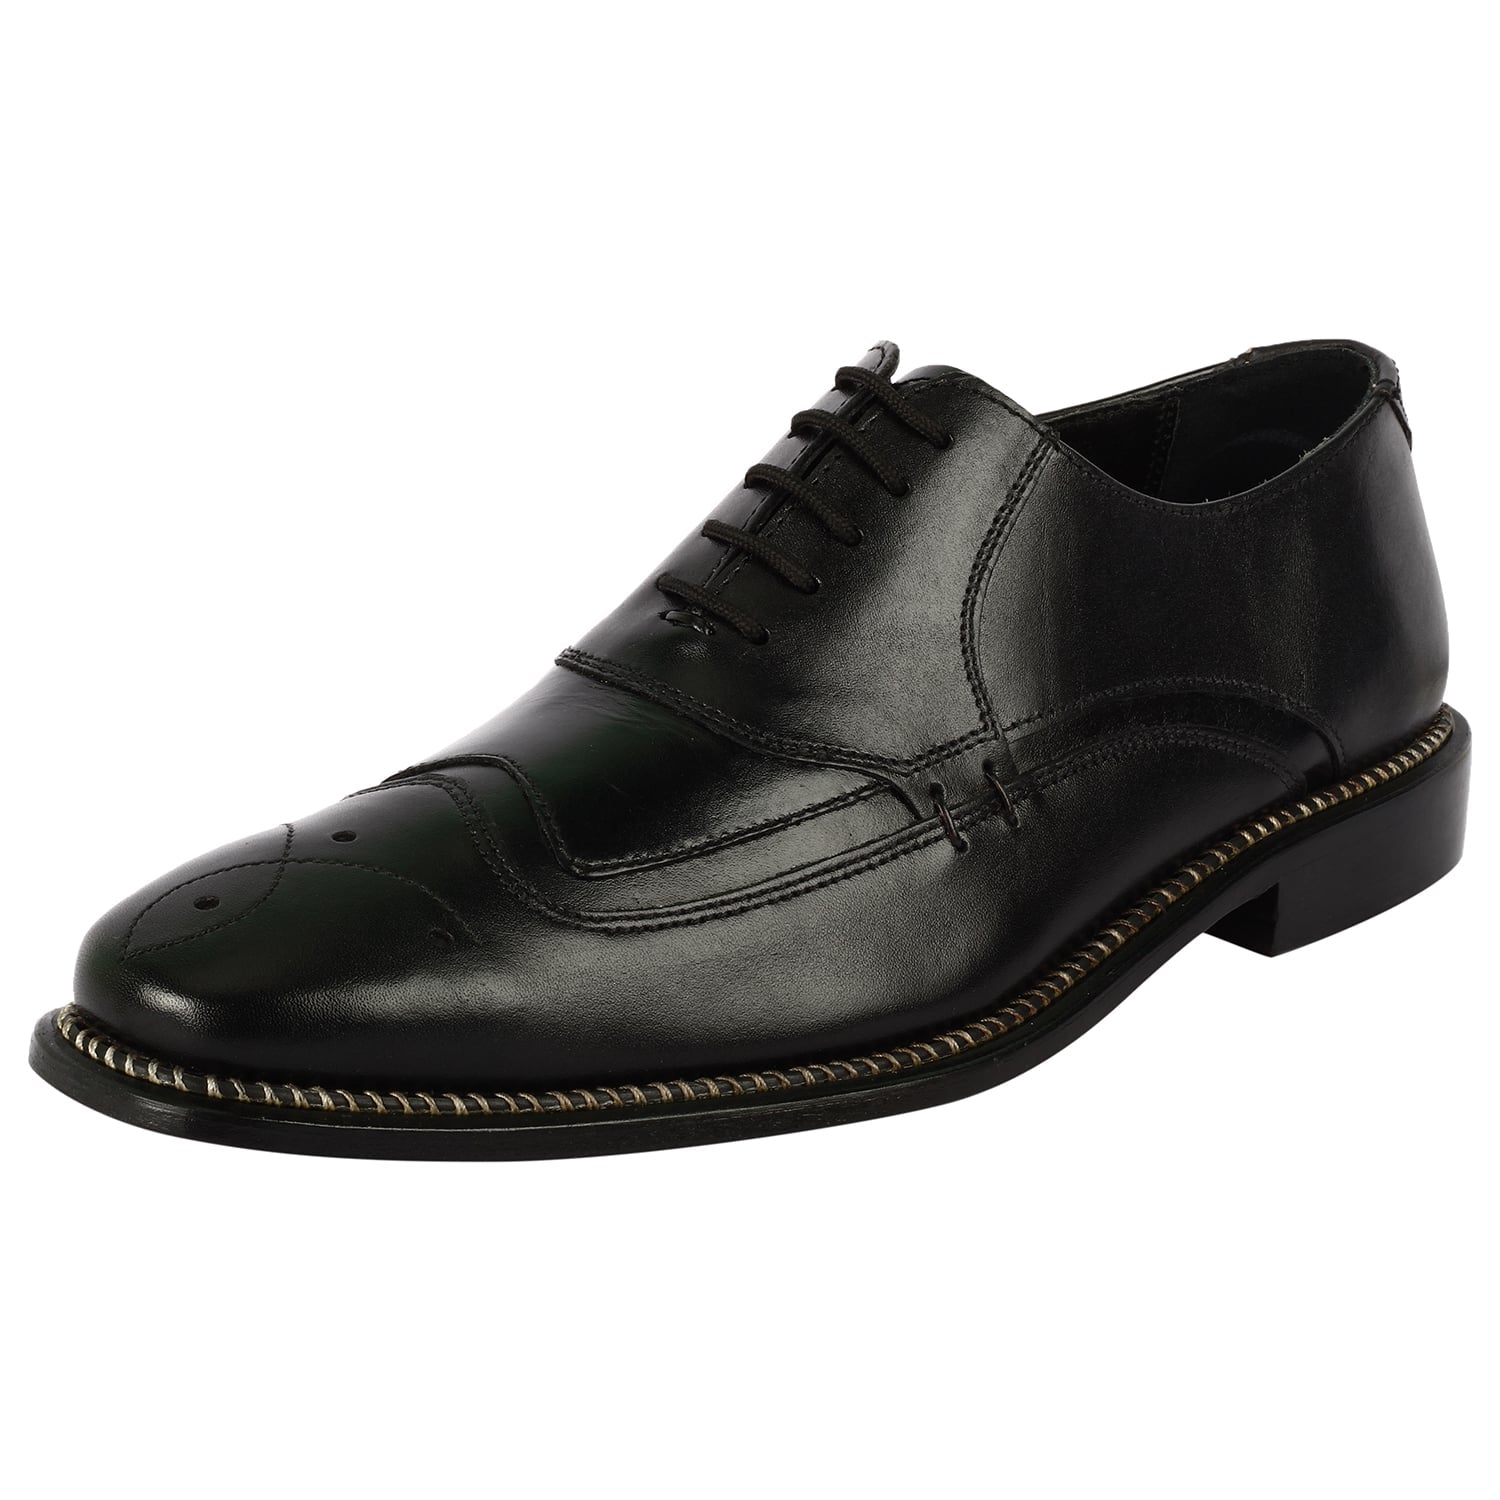 Youth Leather brogue Oxford Style Dress Shoes